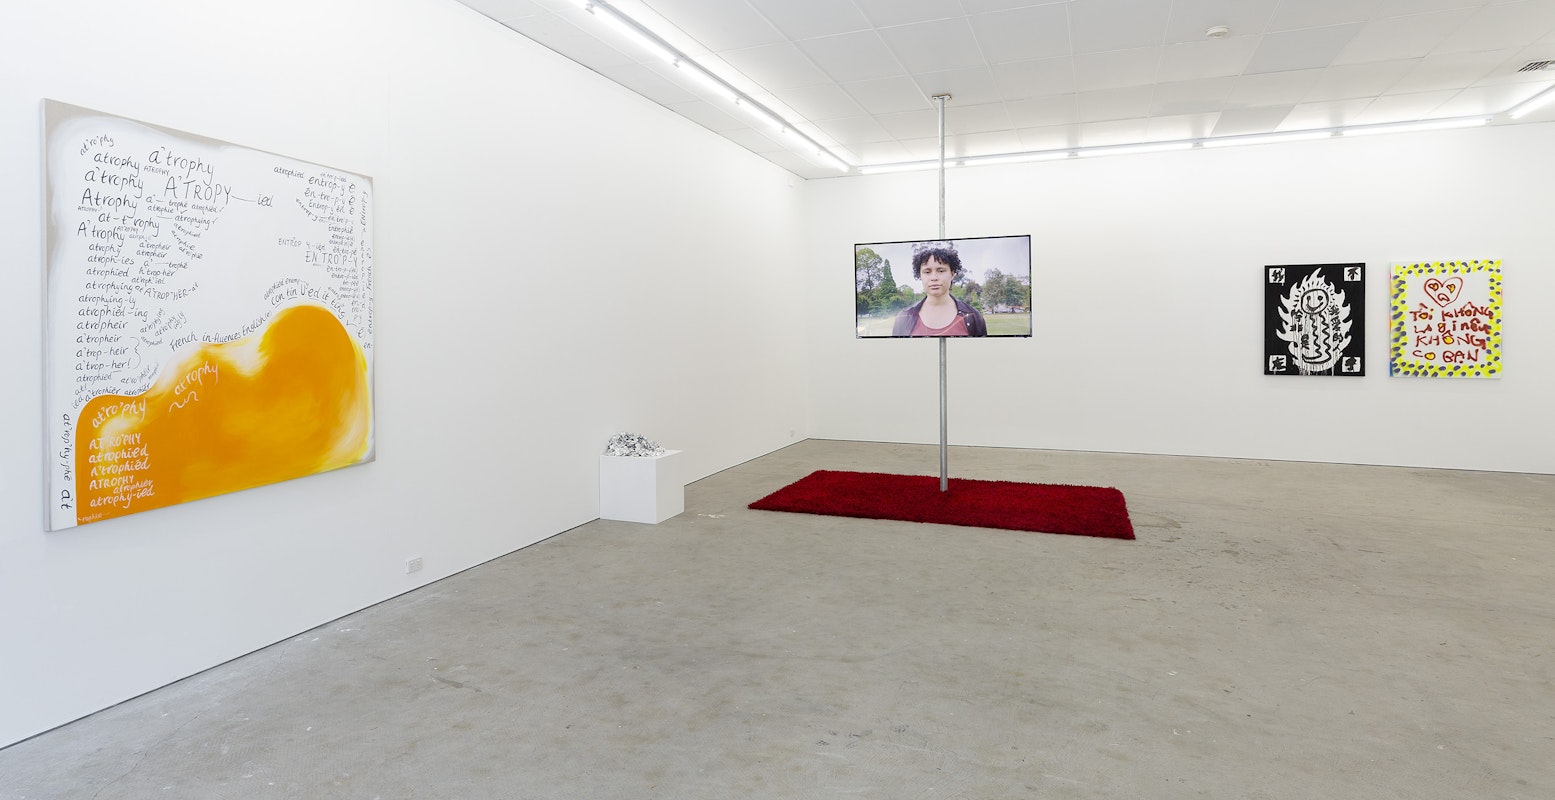 Installation view of Gertrude Studios 2021: If Not At Arm's Length, curated by Tim Riley Walsh, featuring work by Darcey Bella Arnold, Amrita Hepi, and Jason Phu at Gertrude Contemporary.  Photo: Christian Capurro. 